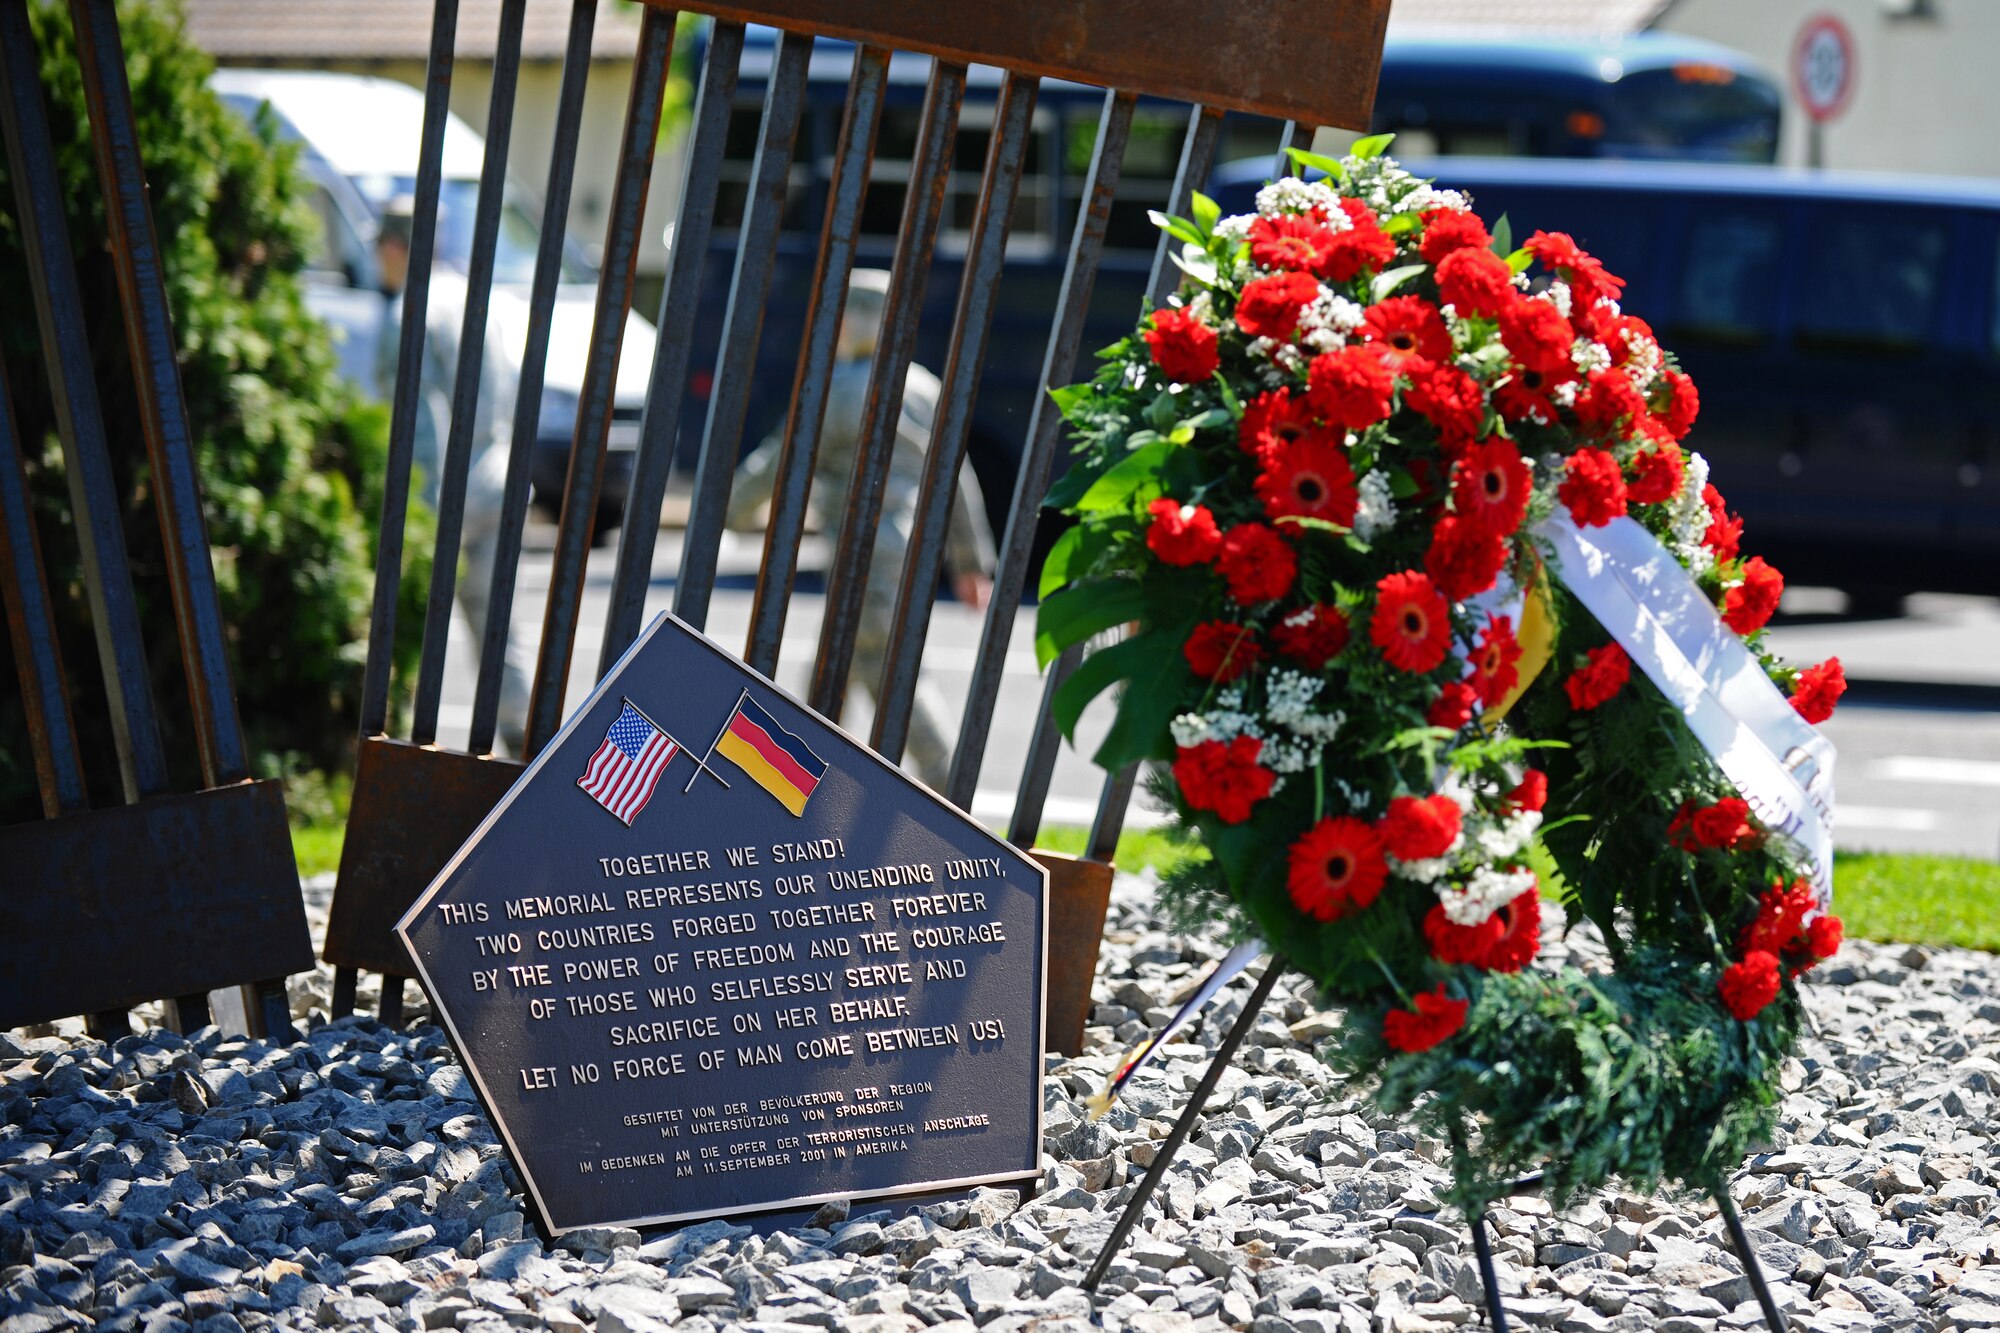 SPANGDAHLEM AIR BASE, Germany – A wreath sits on display next to a 9/11 memorial plaque after the 9/11 memorial dedication and wreath-laying ceremony here May 25. The 9/11 memorial was donated to the 52nd Fighter Wing by the Host Nation Council Spangdahlem and local businesses.  The sculpture was designed by Hubert Kruft, artist, from Niederpruem. (U.S. Air Force photo by Airman 1st Class Matthew B. Fredericks/Released)